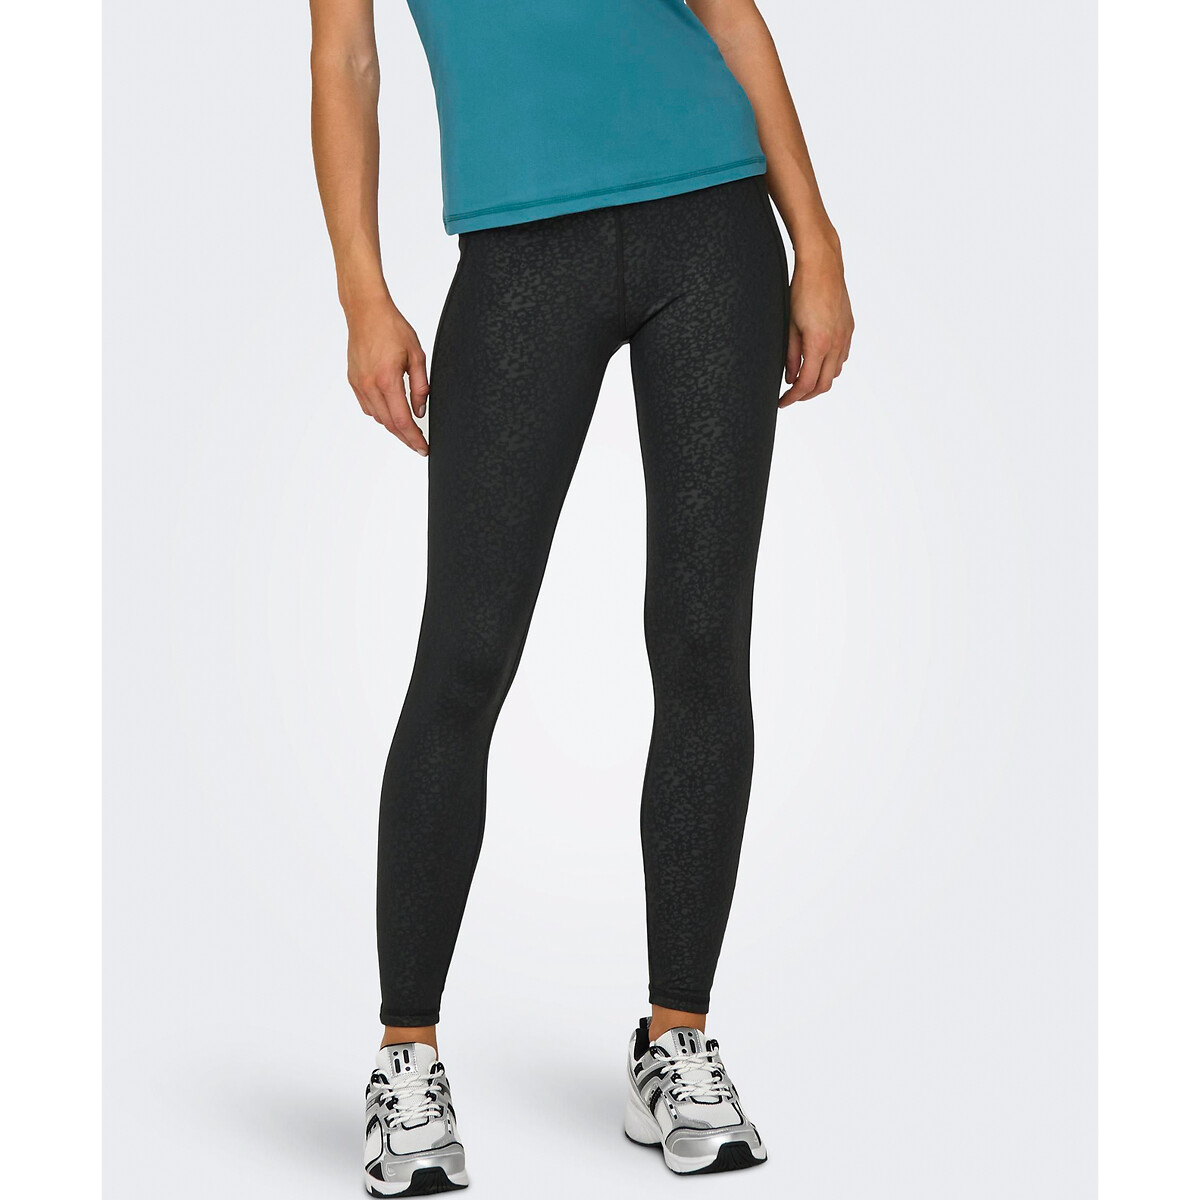 Image of Jam Jung 2 Sports Leggings with High Waist